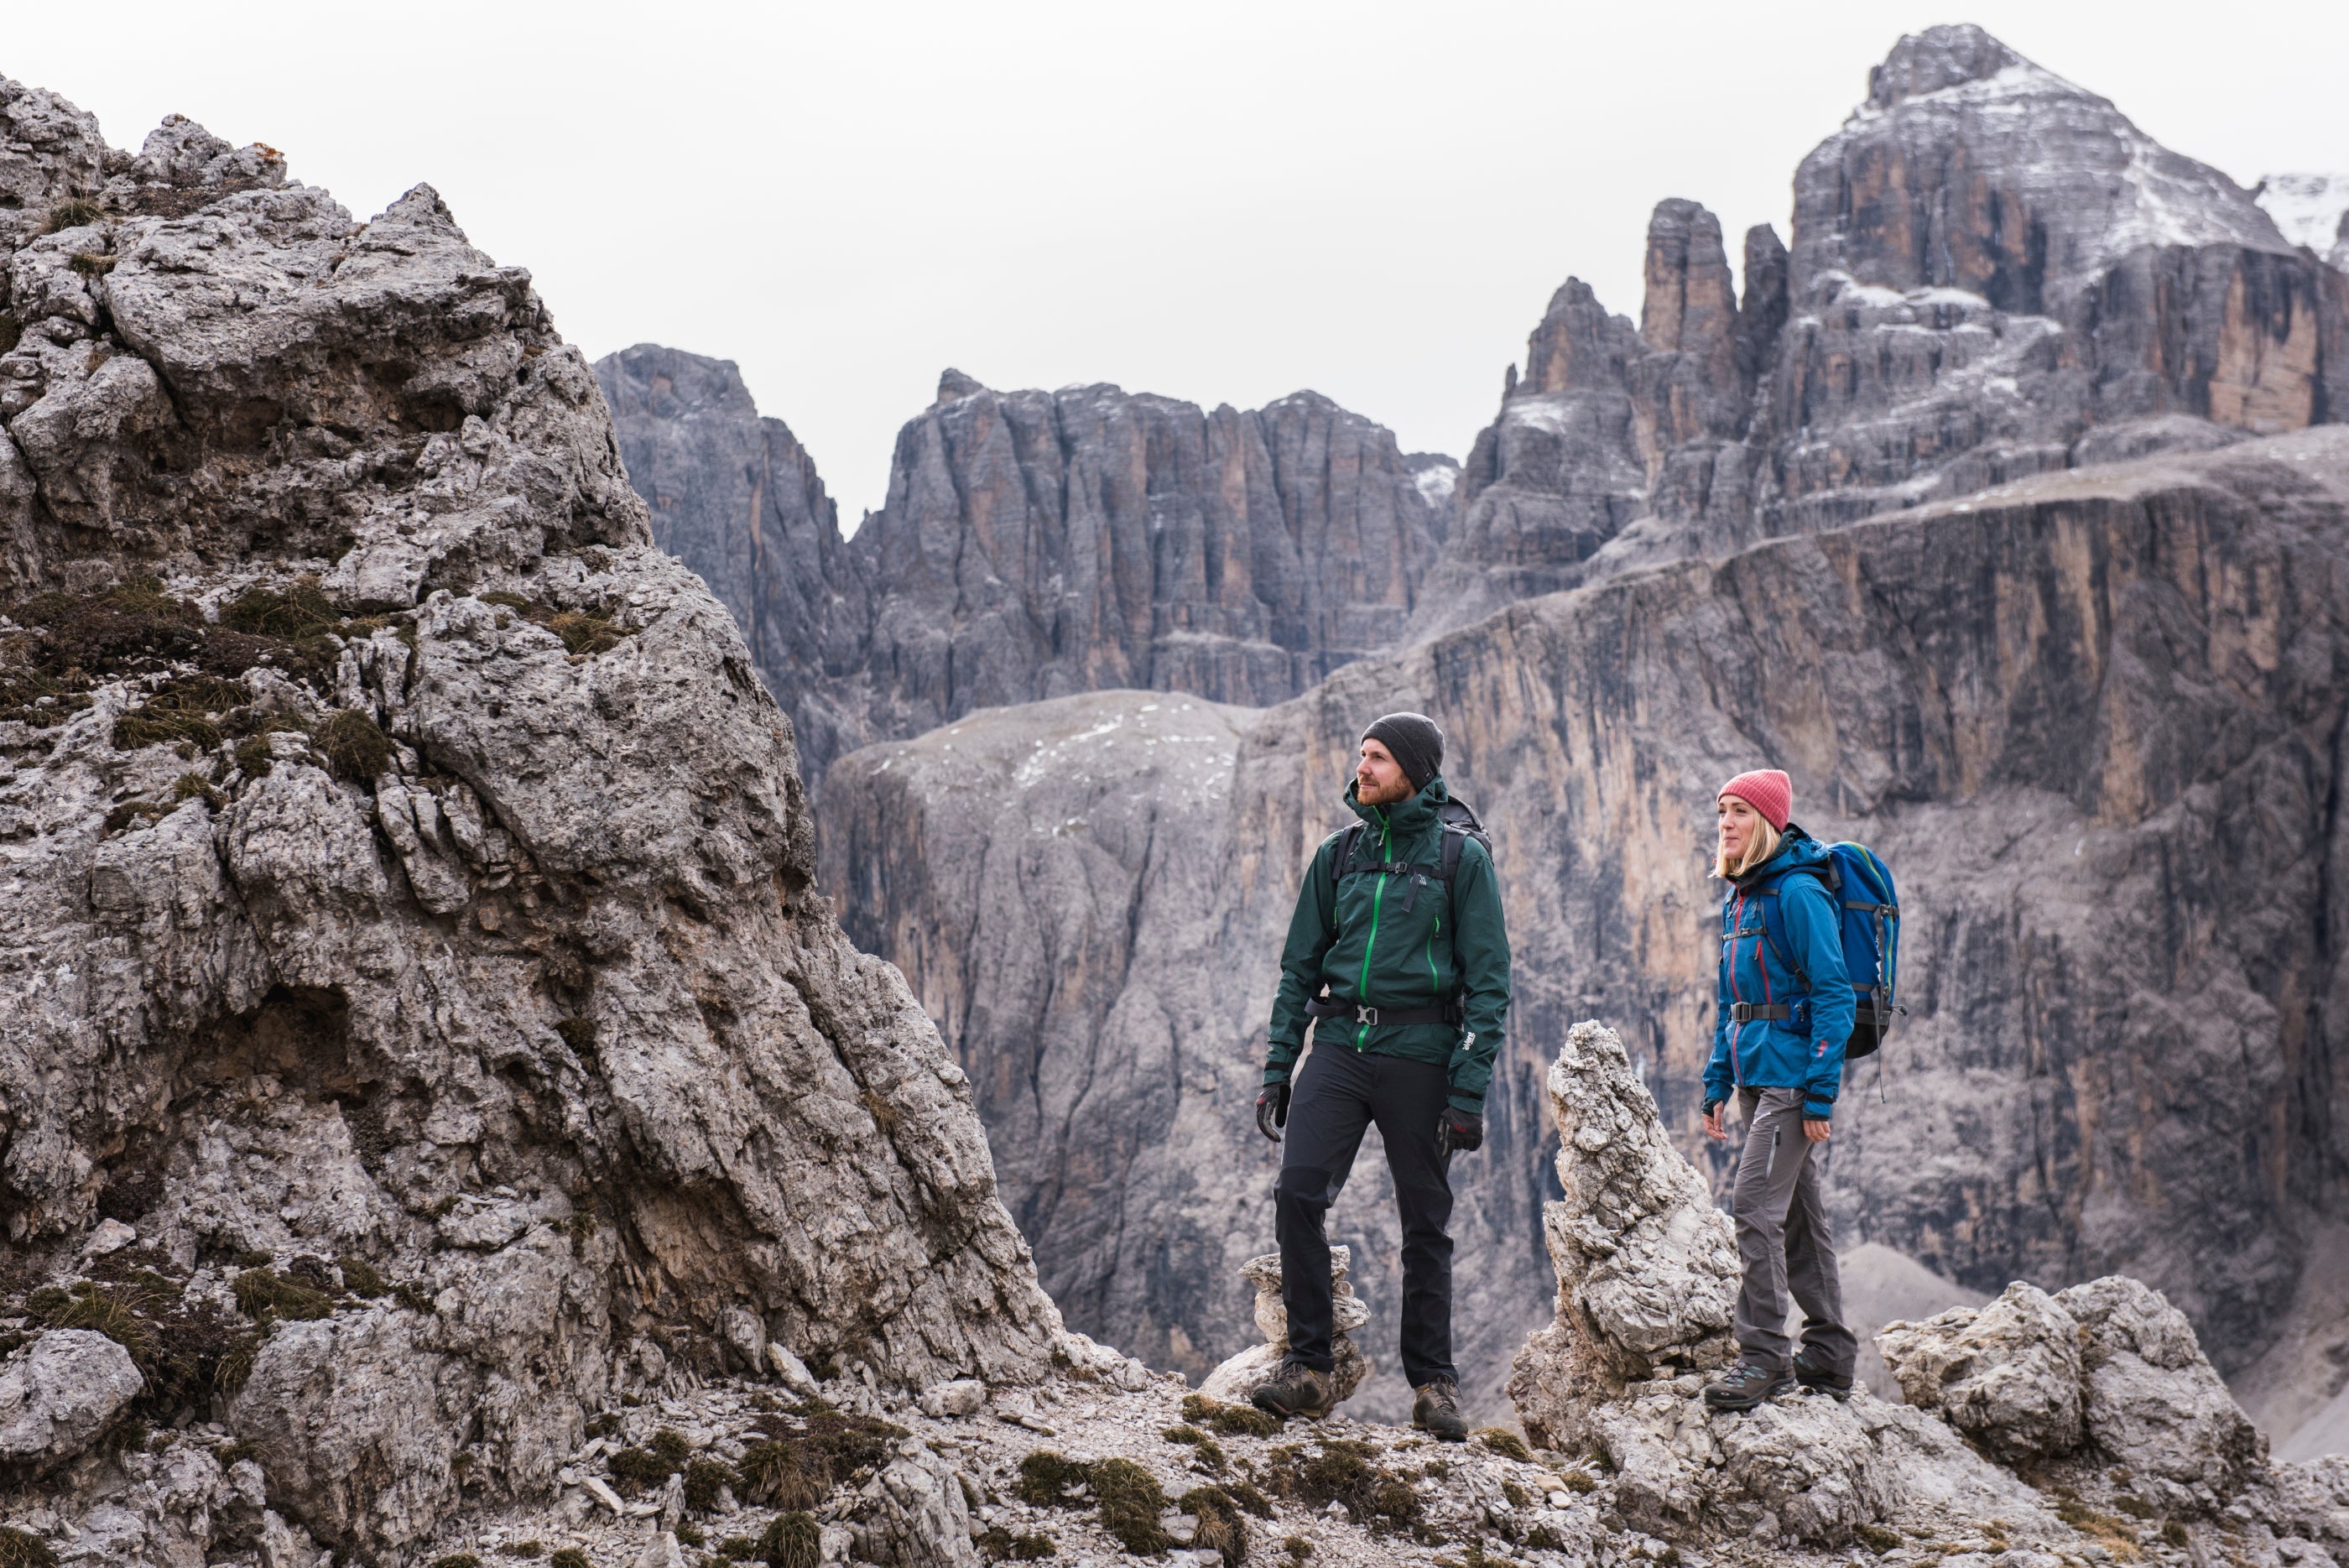 Fjern Orkan Jacket being worn on a Dolomite plateau